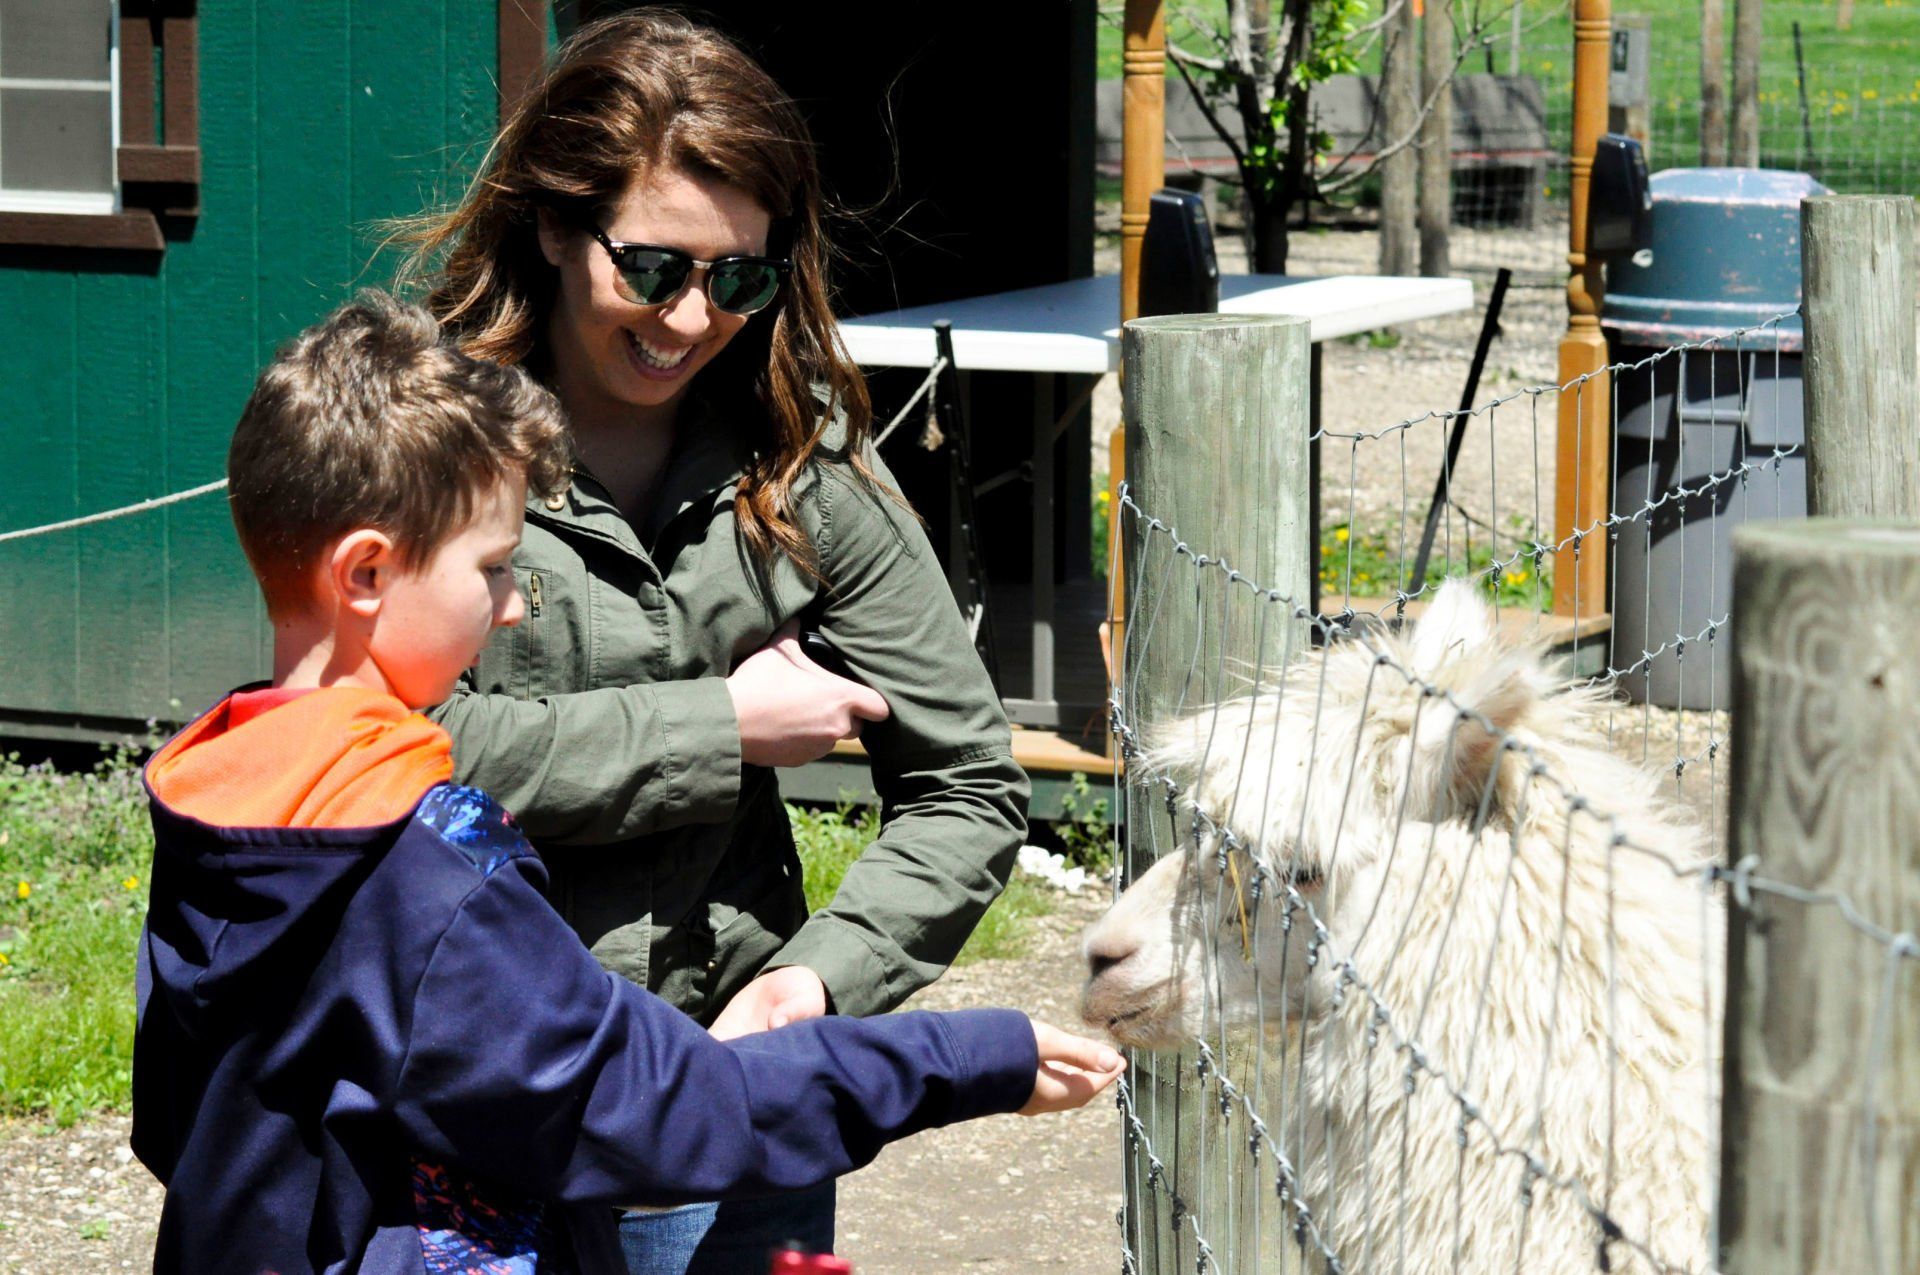 Petting zoo with woman and boy